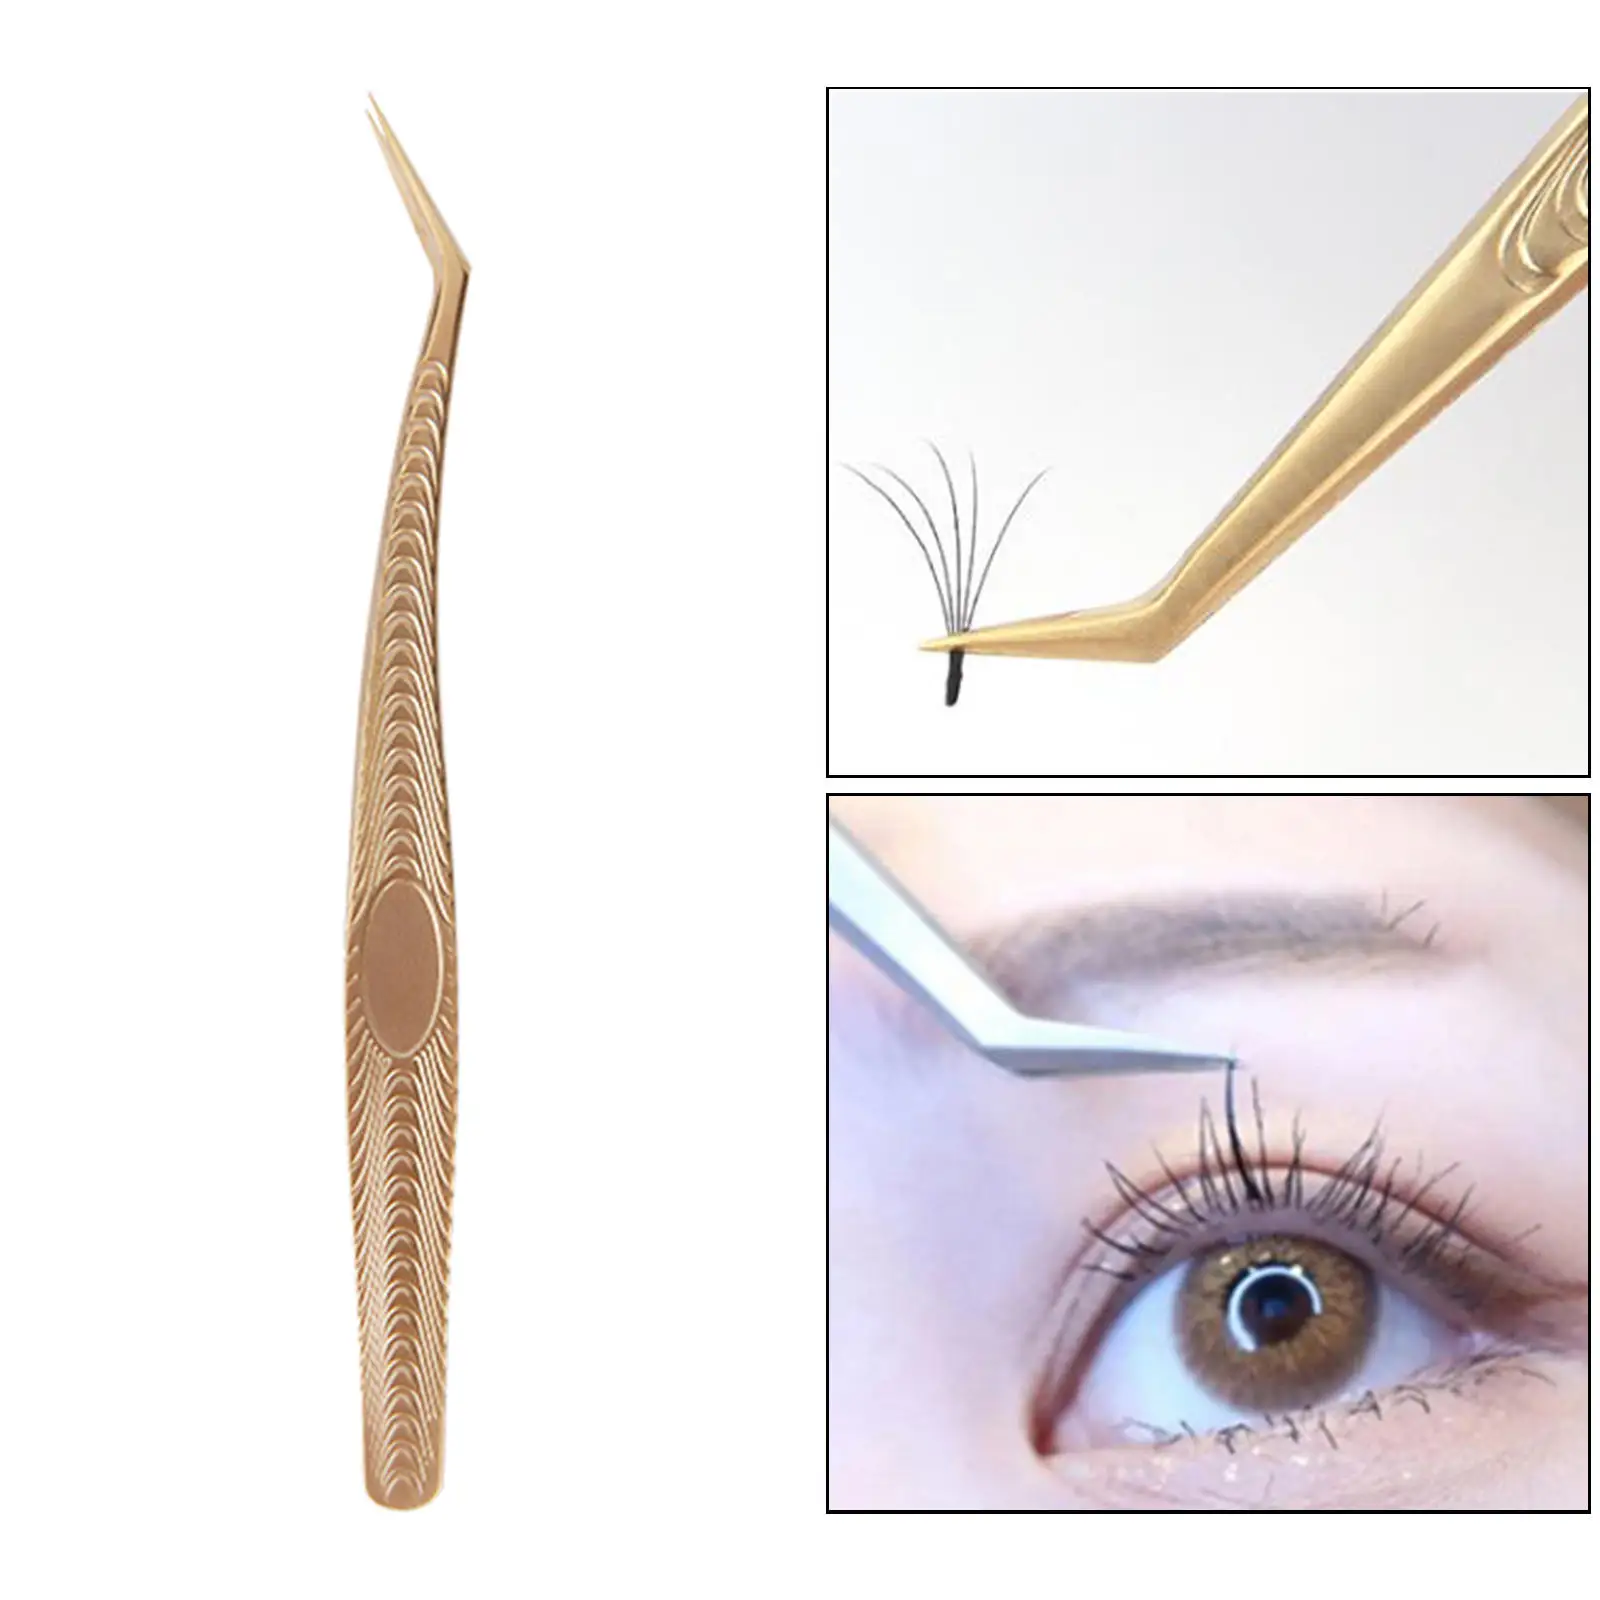 Stainless Steel Eyelash Tweezers Extension Straight and Curved Tip Nippers False Lash Application Tools Lash Extension Supplies